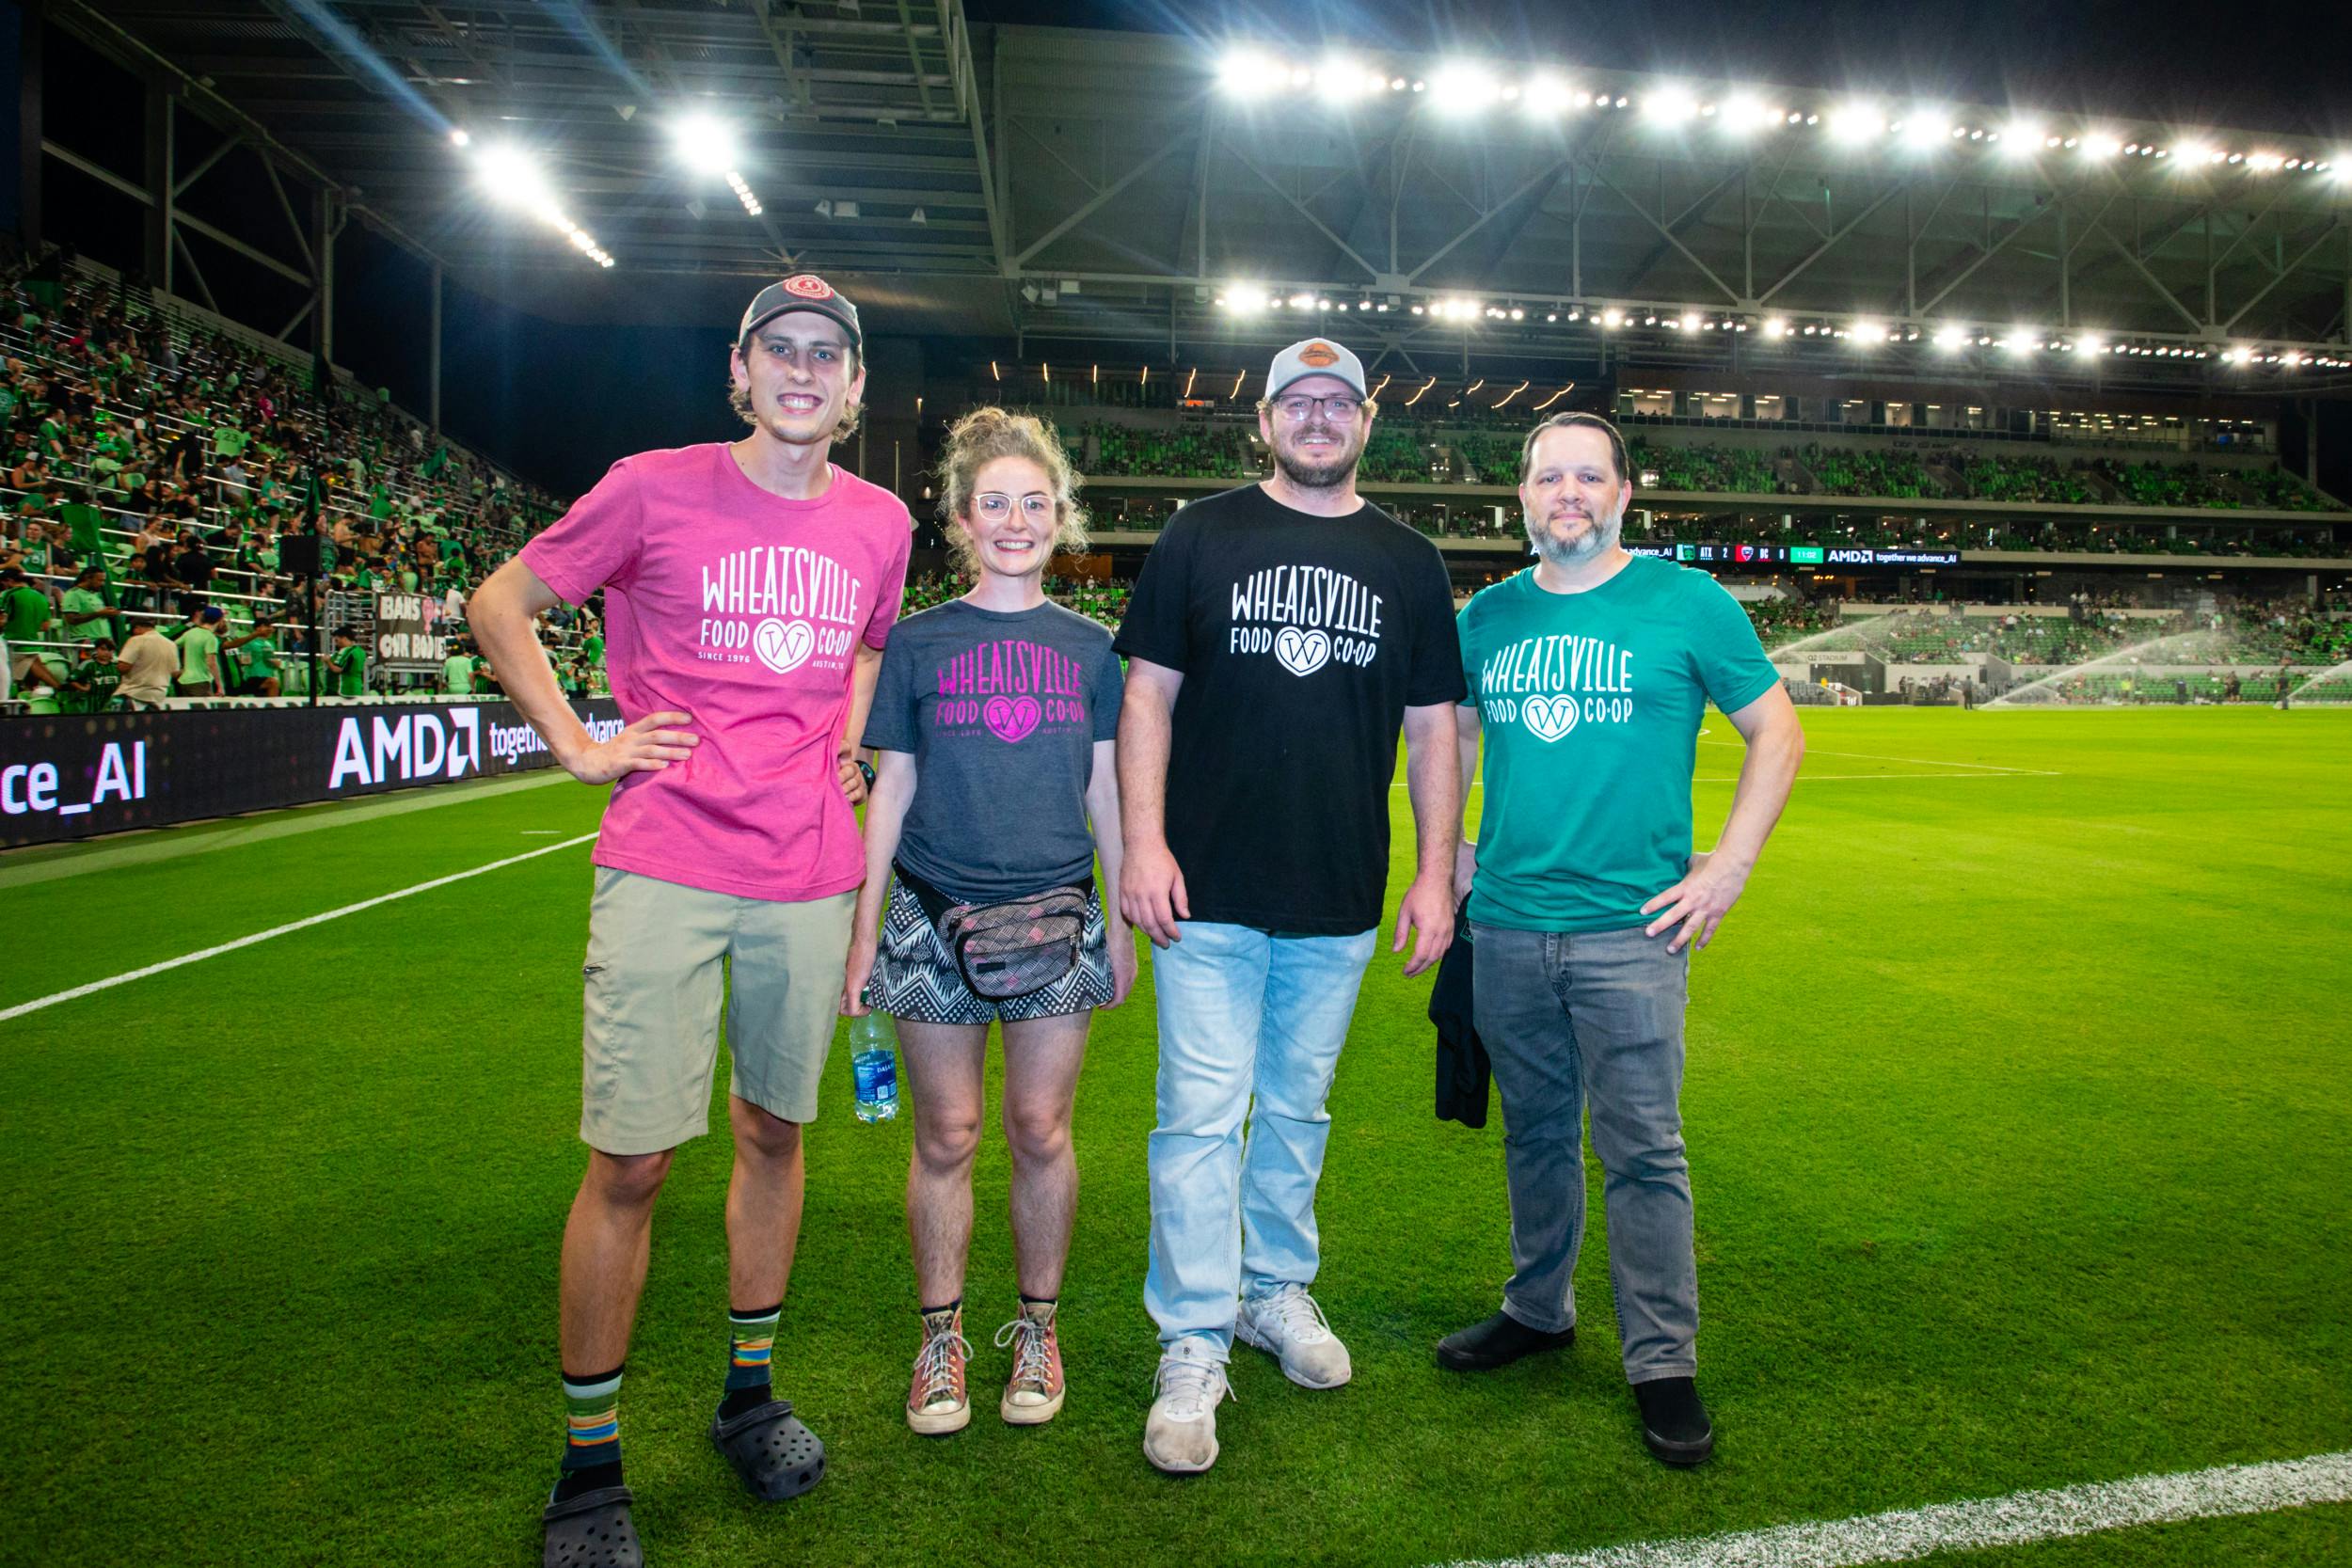 Curative advocates for two companies each regular MLS season that are game-changers in their field and focusing on furthering the Austin community to spotlight at an Austin FC match.